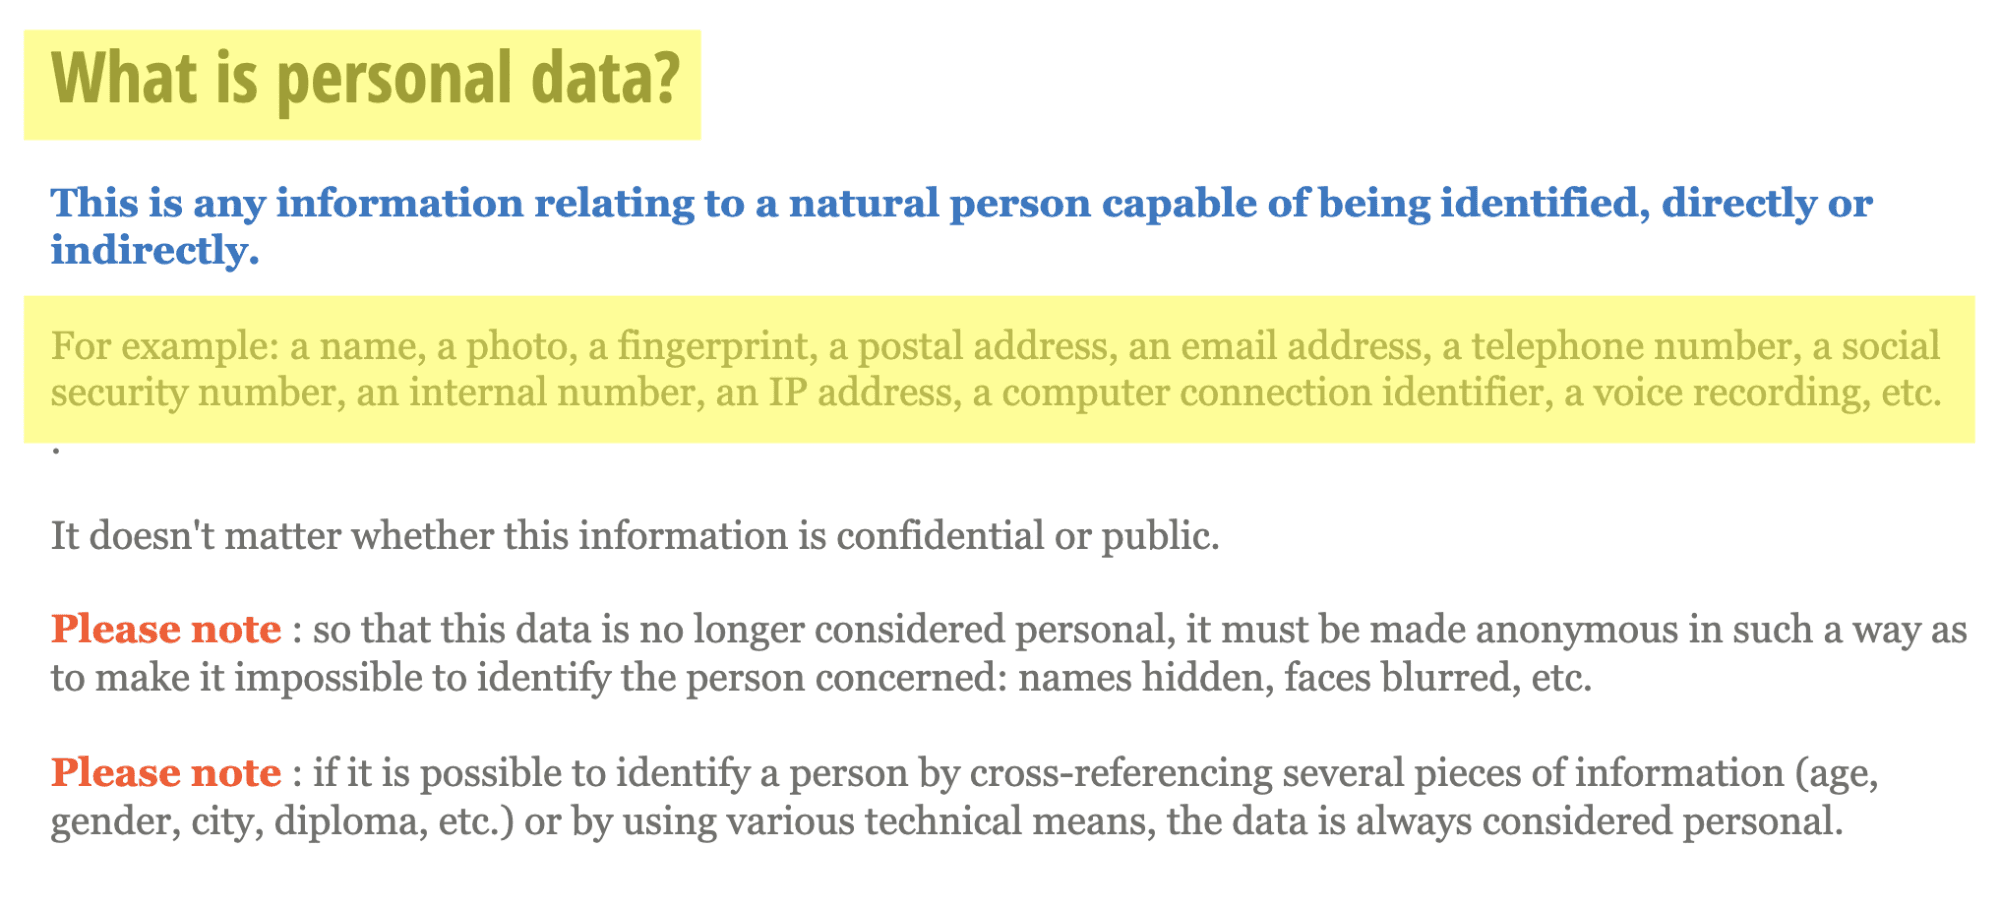 cnil what is personal data - image30.png